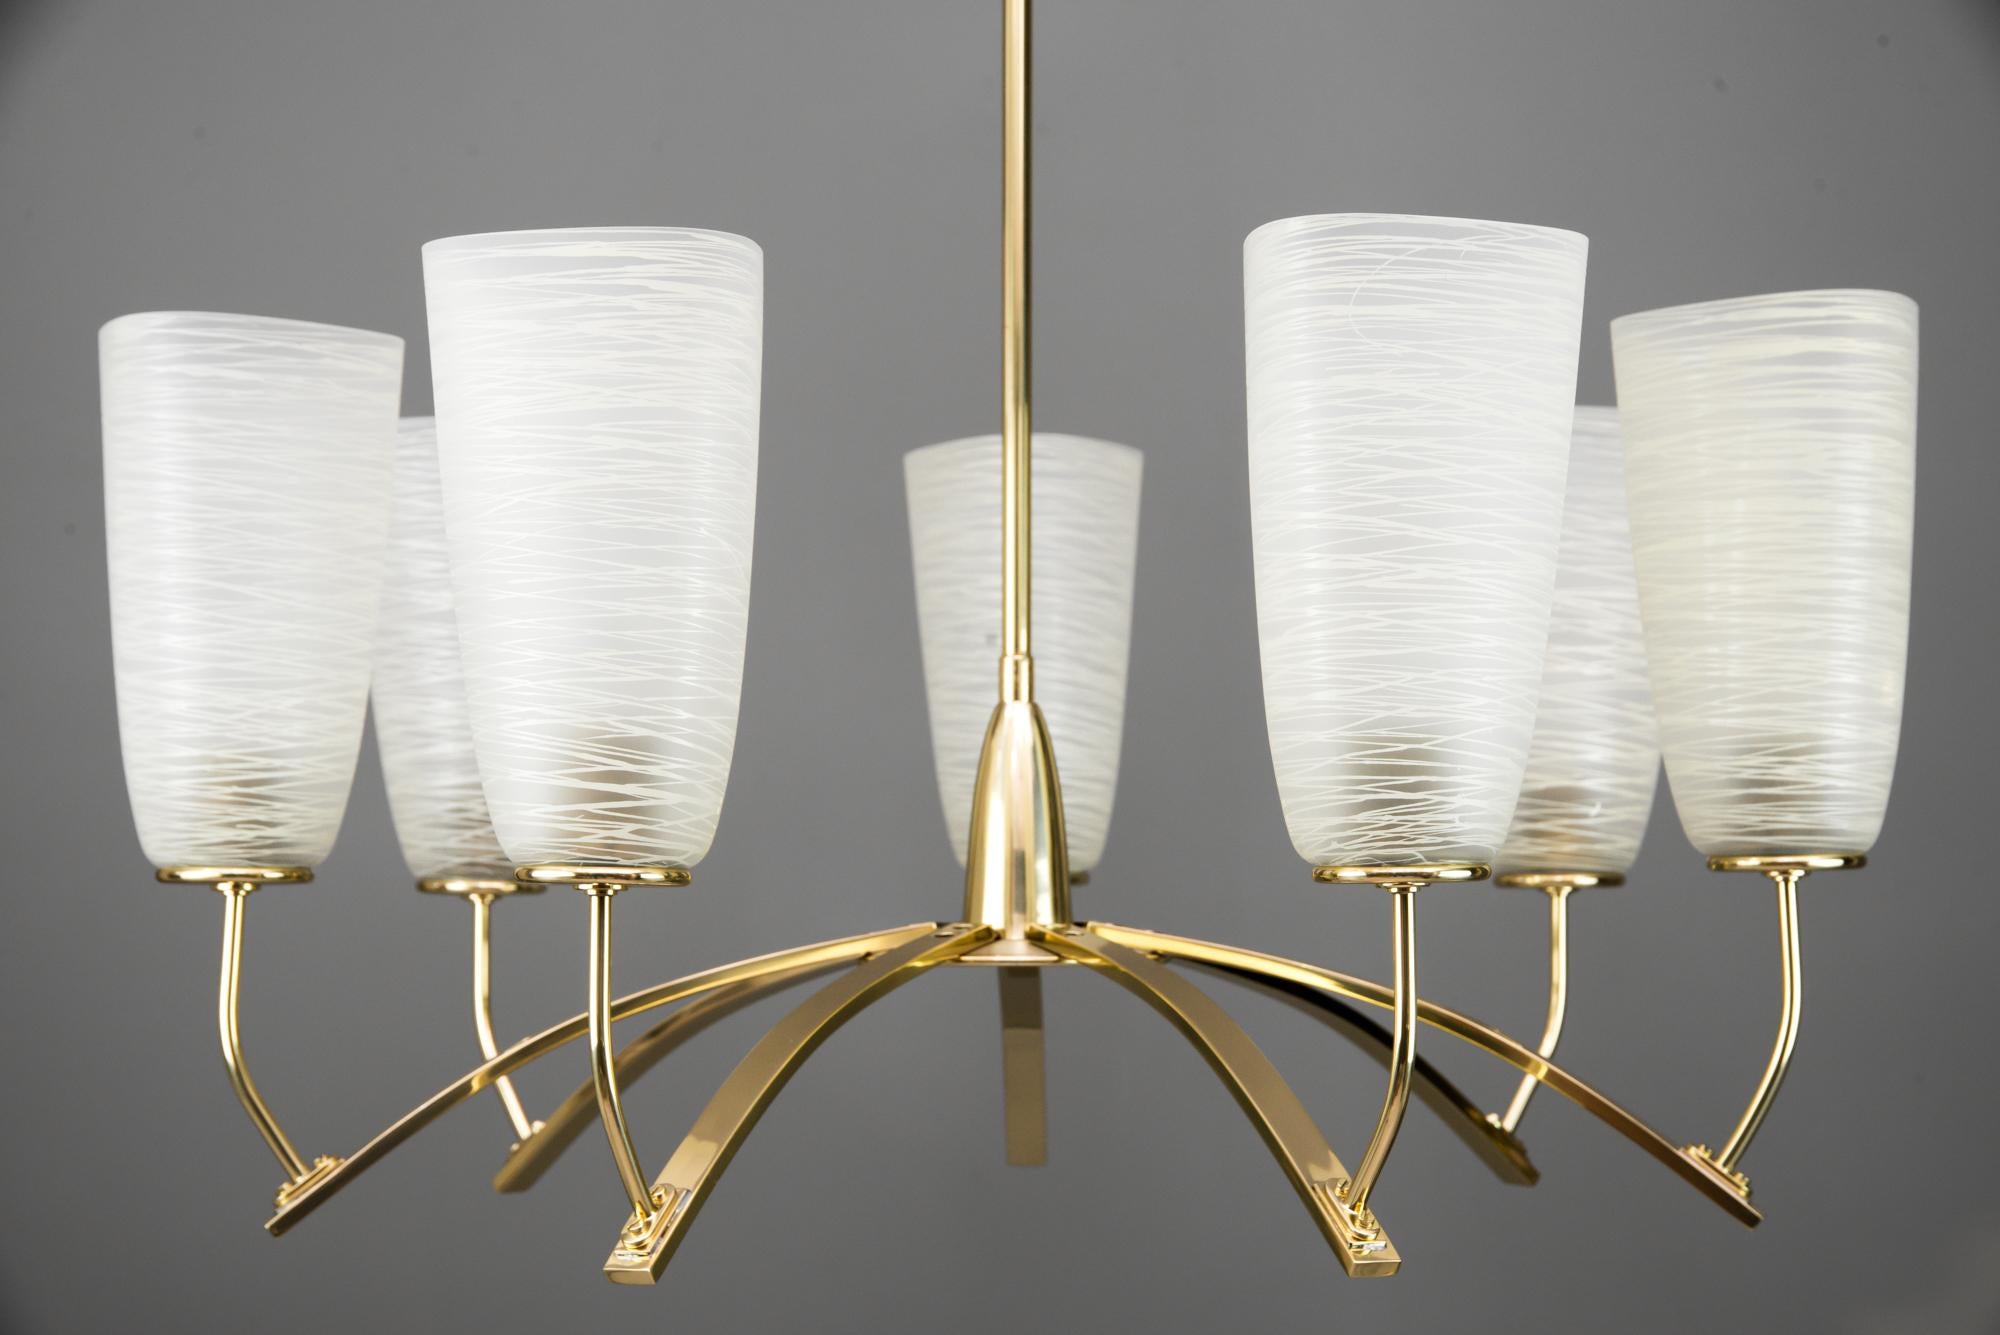 Italian chandelier circa 1960s
Polished and stove enamelled.